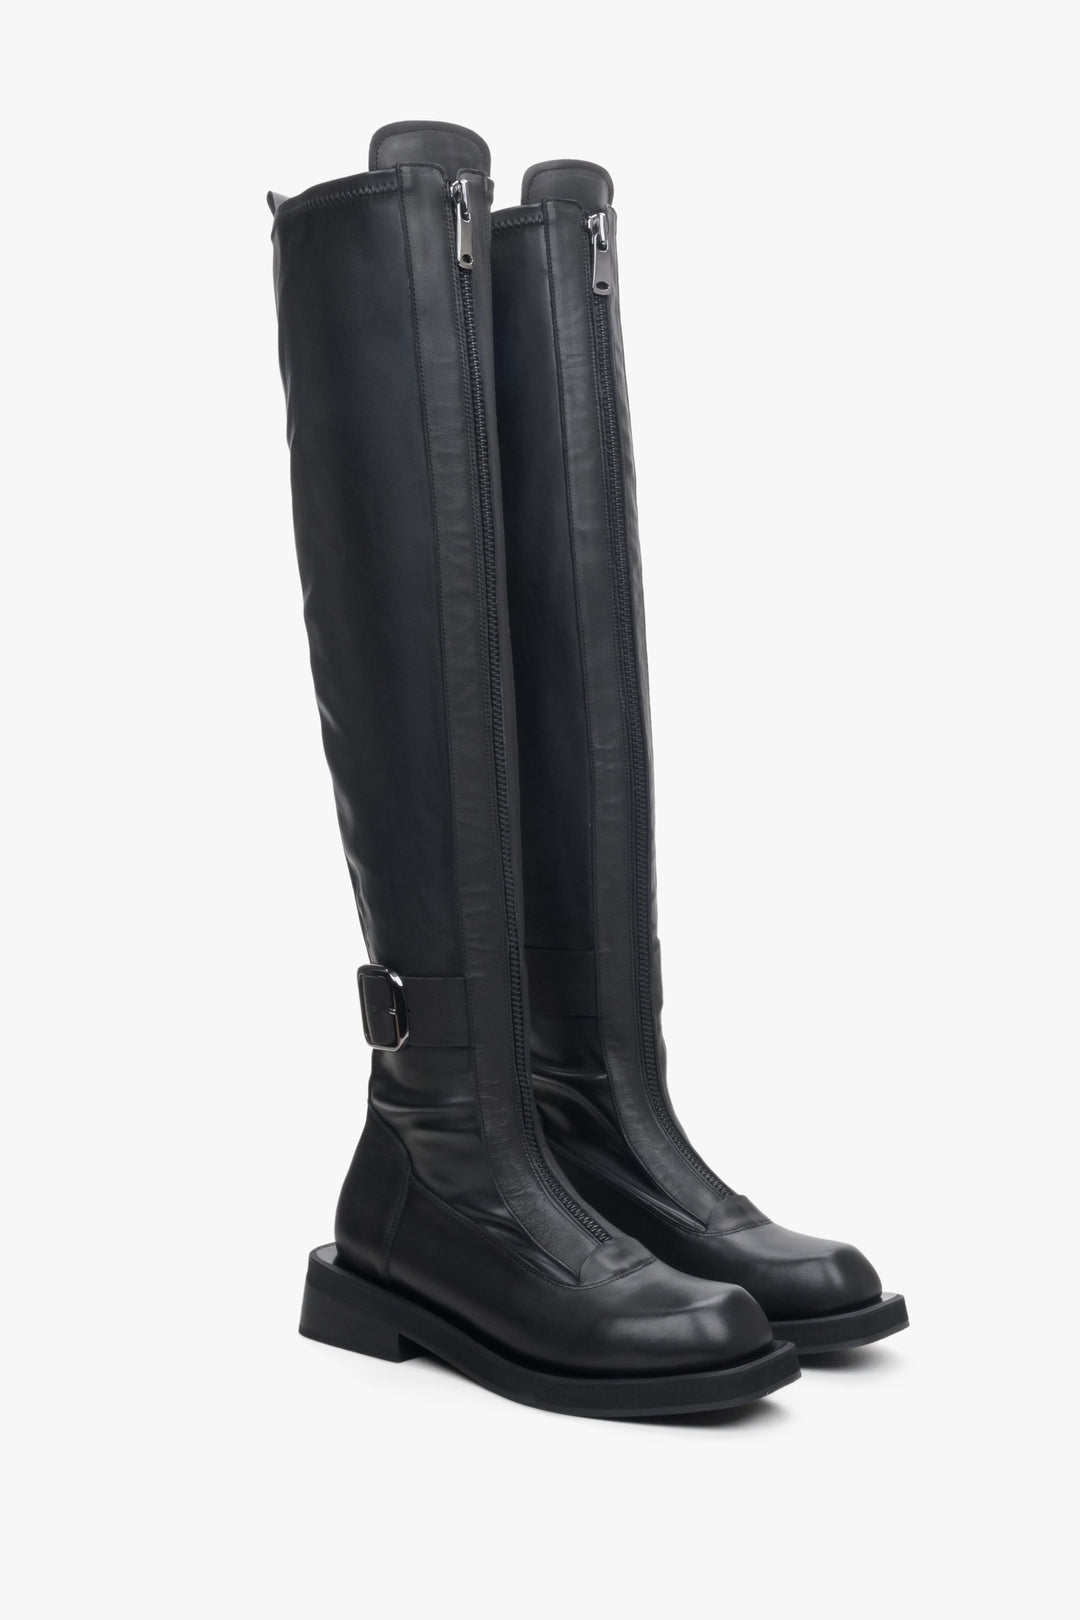 Estro women's  black leather high boots - close-up on the toe and side line of the boots.